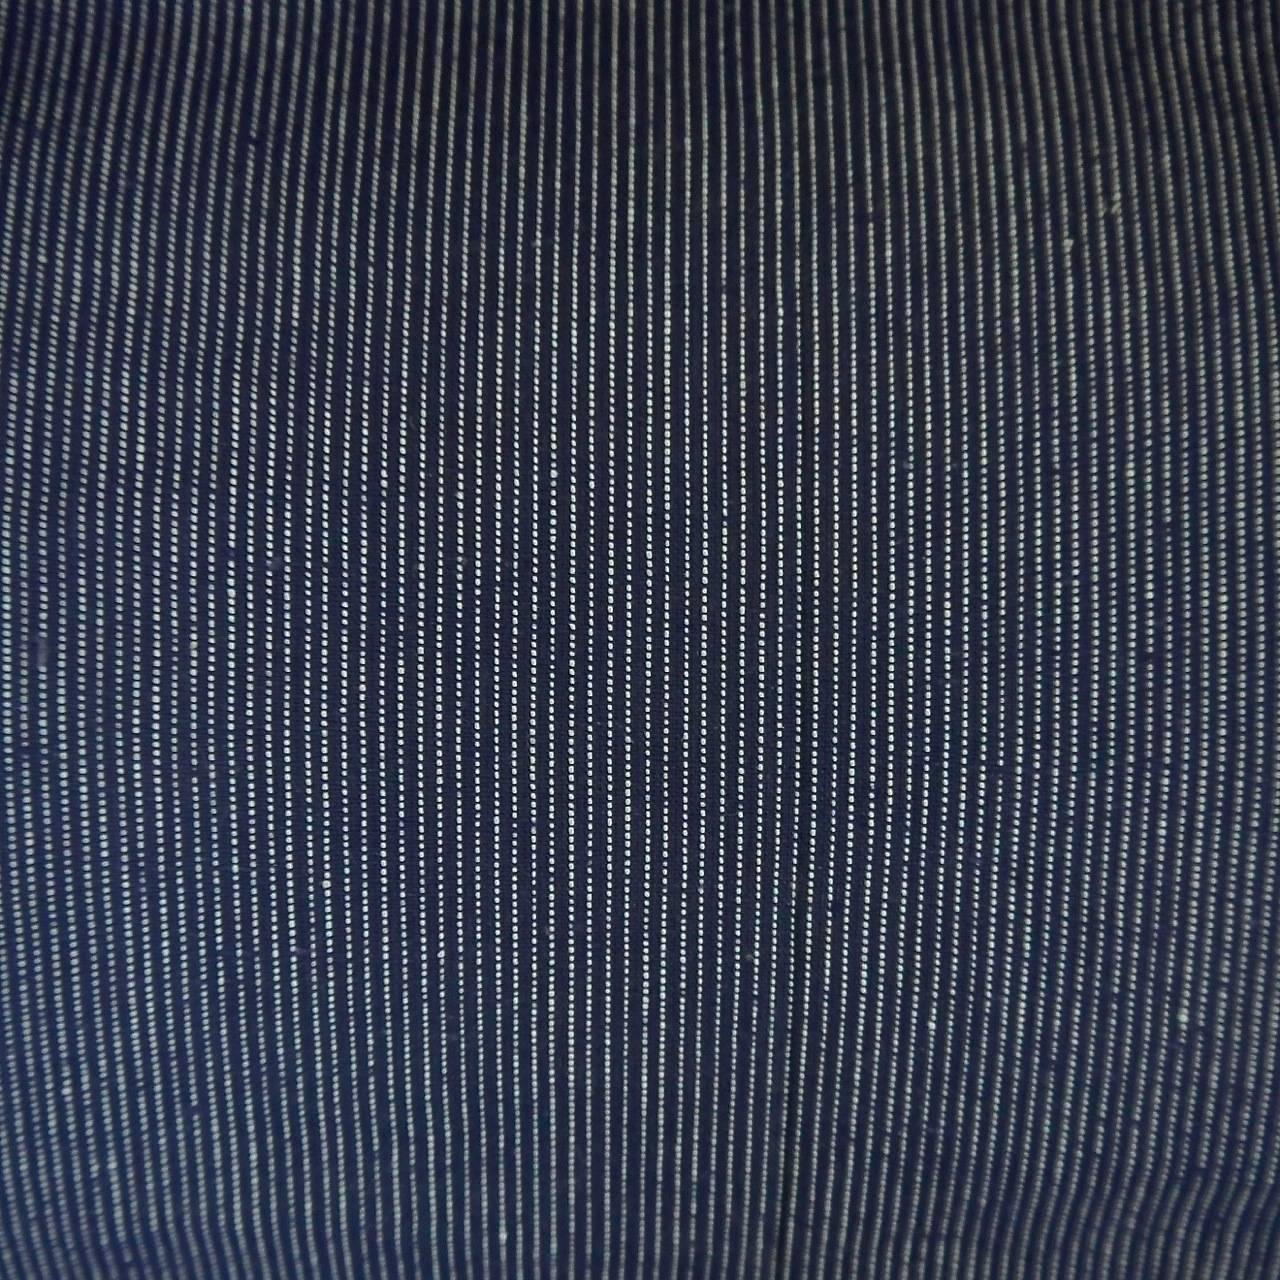 French Provincial Antique French Roll of Unused Woven Dark Indigo Striped Cotton Cloth